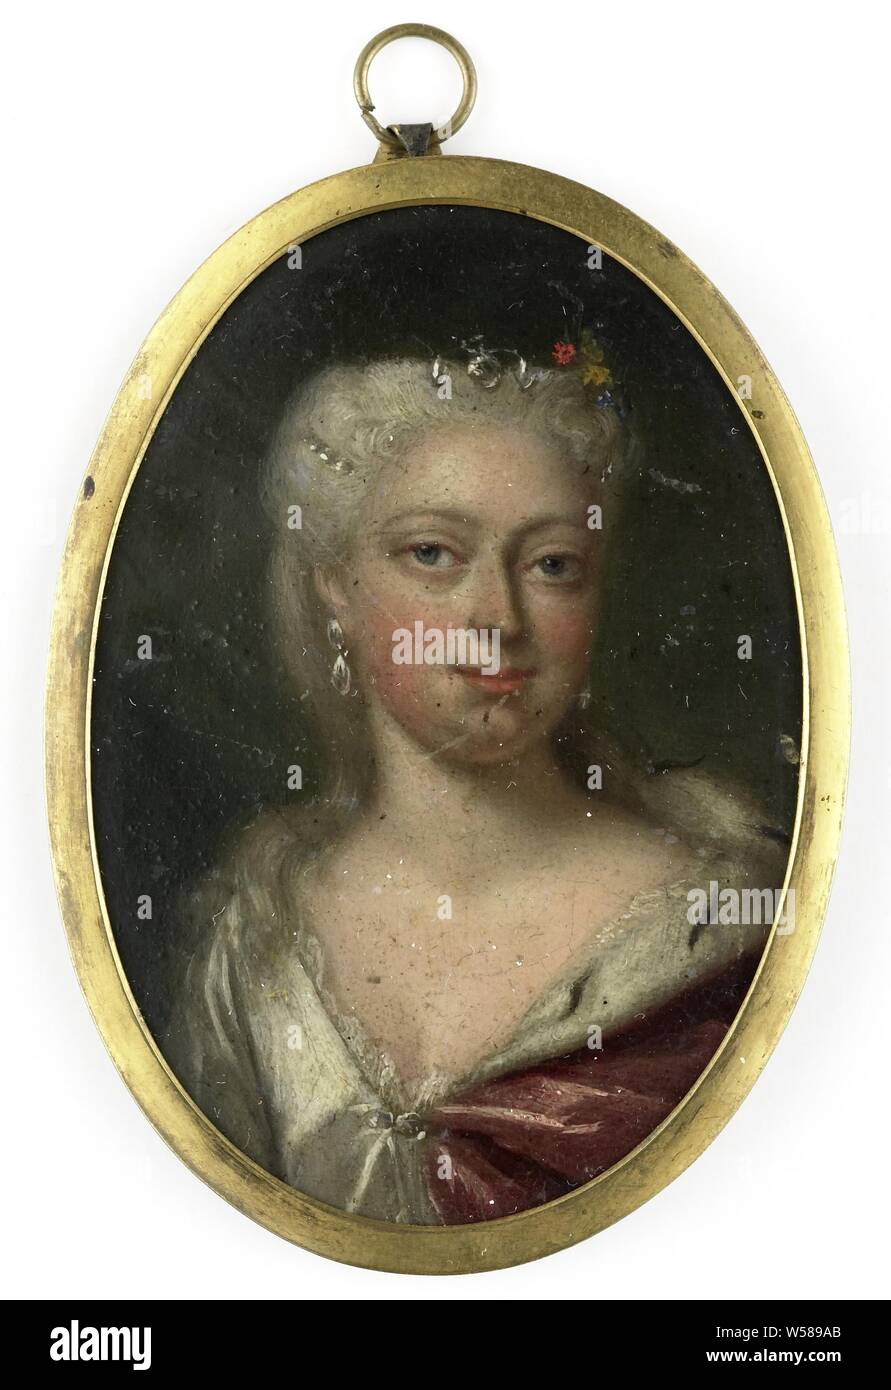 Portrait of Anna from Hanover (1709-59). Wife of Prince Willem IV, Portrait of Anna of Hanover (1709-59). Wife of Prince William IV. Bust, facing. Part of the collection of portrait miniatures, Anna van Hannover, Philip van Dijk, Northern Netherlands, c. 1735 and/or c. 1745, mother of pearl, oil paint (paint), silver (metal), h 6.7 cm × w 4.8 cm h 7.7 cm × w 5 cm × d 0.3 cm Stock Photo